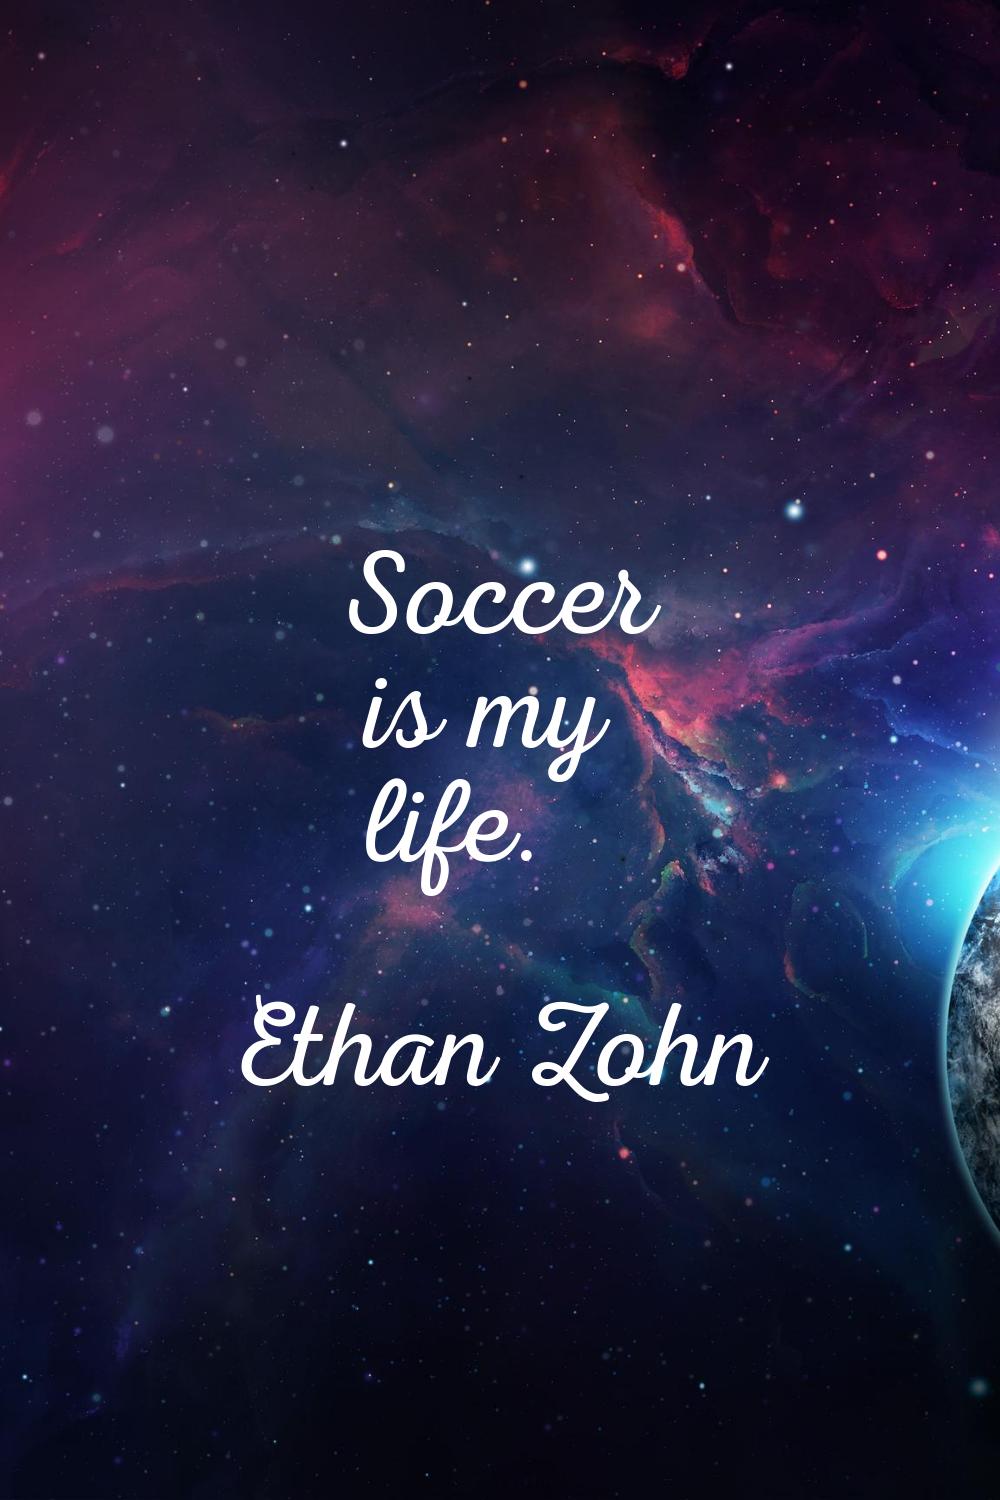 Soccer is my life.